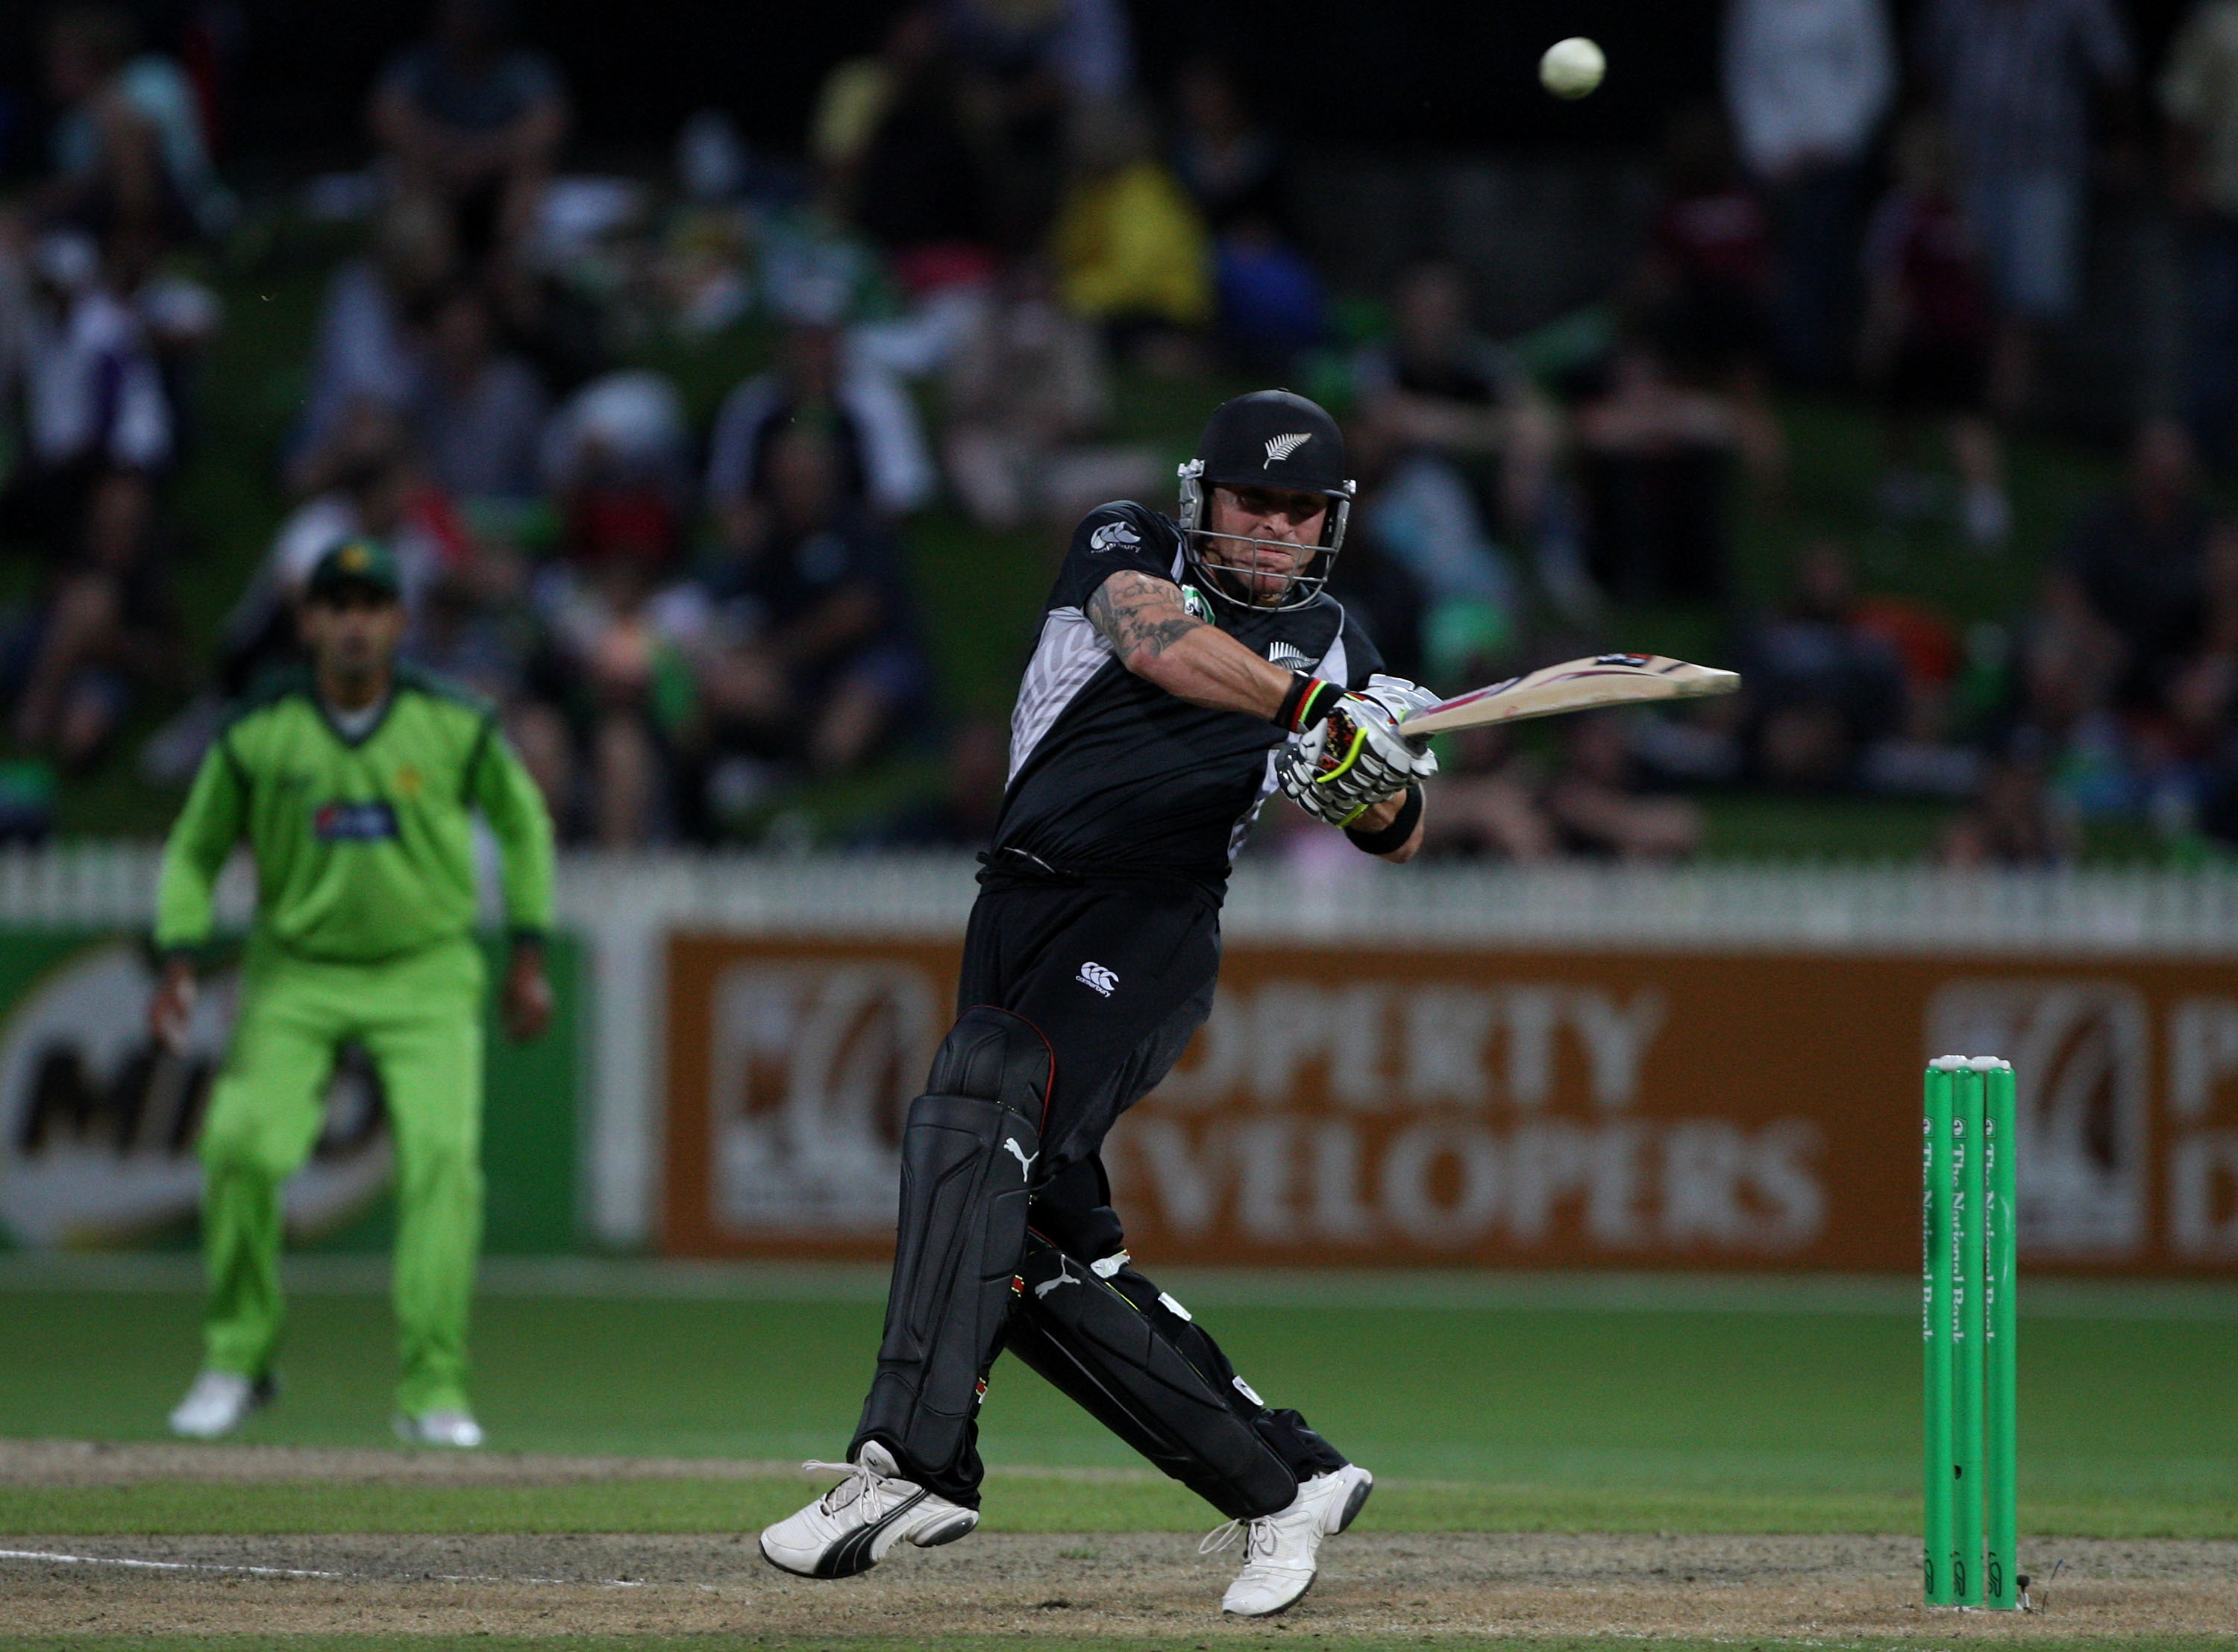 HAMILTON, NEW ZEALAND - FEBRUARY 03:  Brendon McCullum of the Black Caps bats during game five of the one day series between New Zealand and Pakistan at Seddon Park on February 3, 2011 in Hamilton, New Zealand.  (Photo by Sandra Mu/Getty Images)